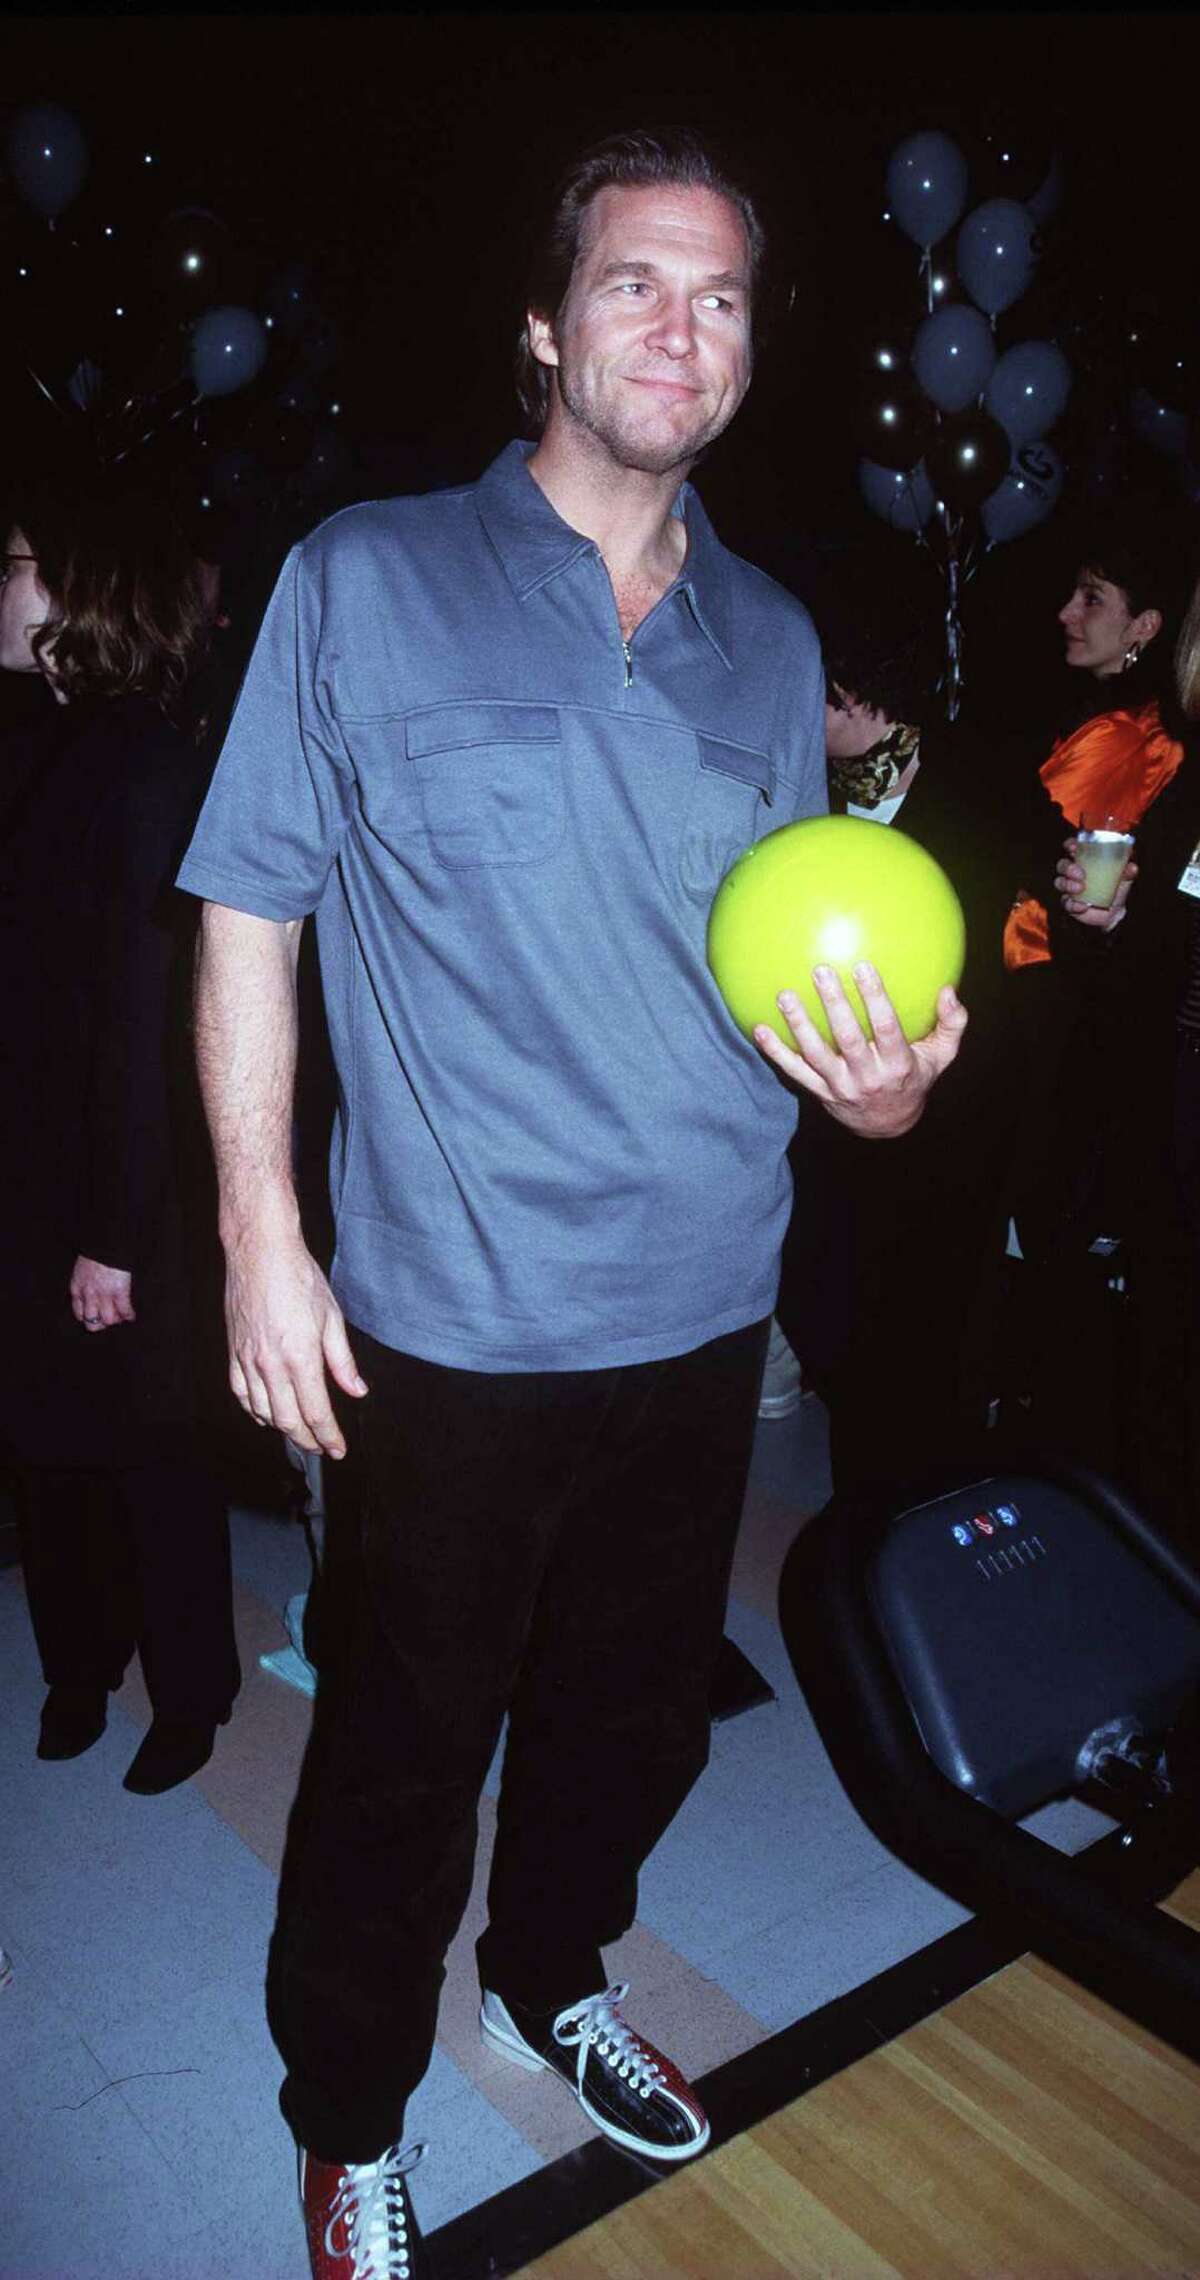 Jeff Bridges – Jeff “The Dude” Lebowski -- pictured in 1998 during the film's post-premiere bowling tournament and dinner.